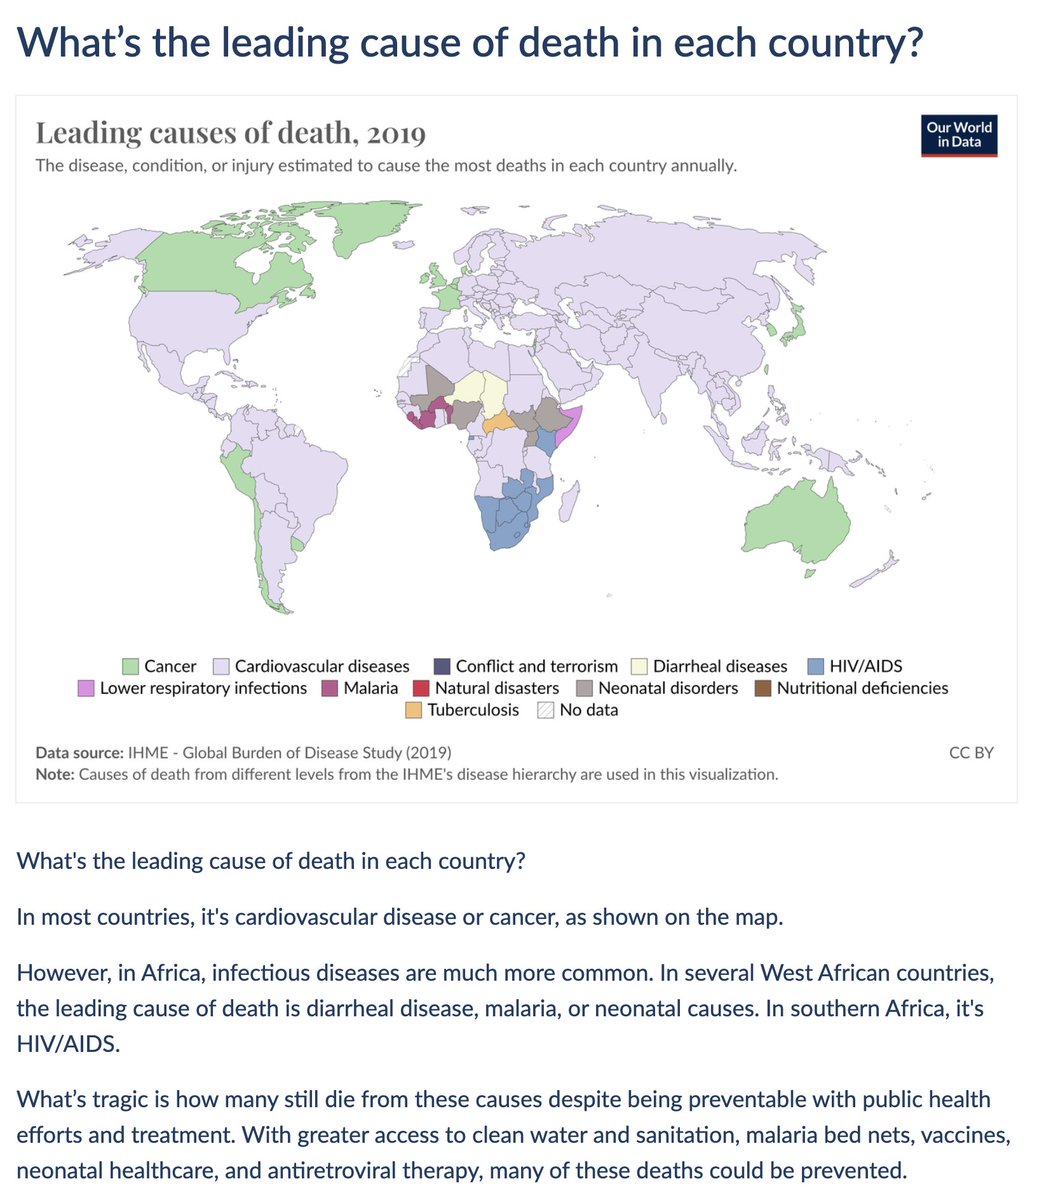 Today's Data Insight, by @salonium & @f_spooner What’s the leading cause of death in each country? Find all of our Data Insights on their dedicated feed: ourworldindata.org/data-insights